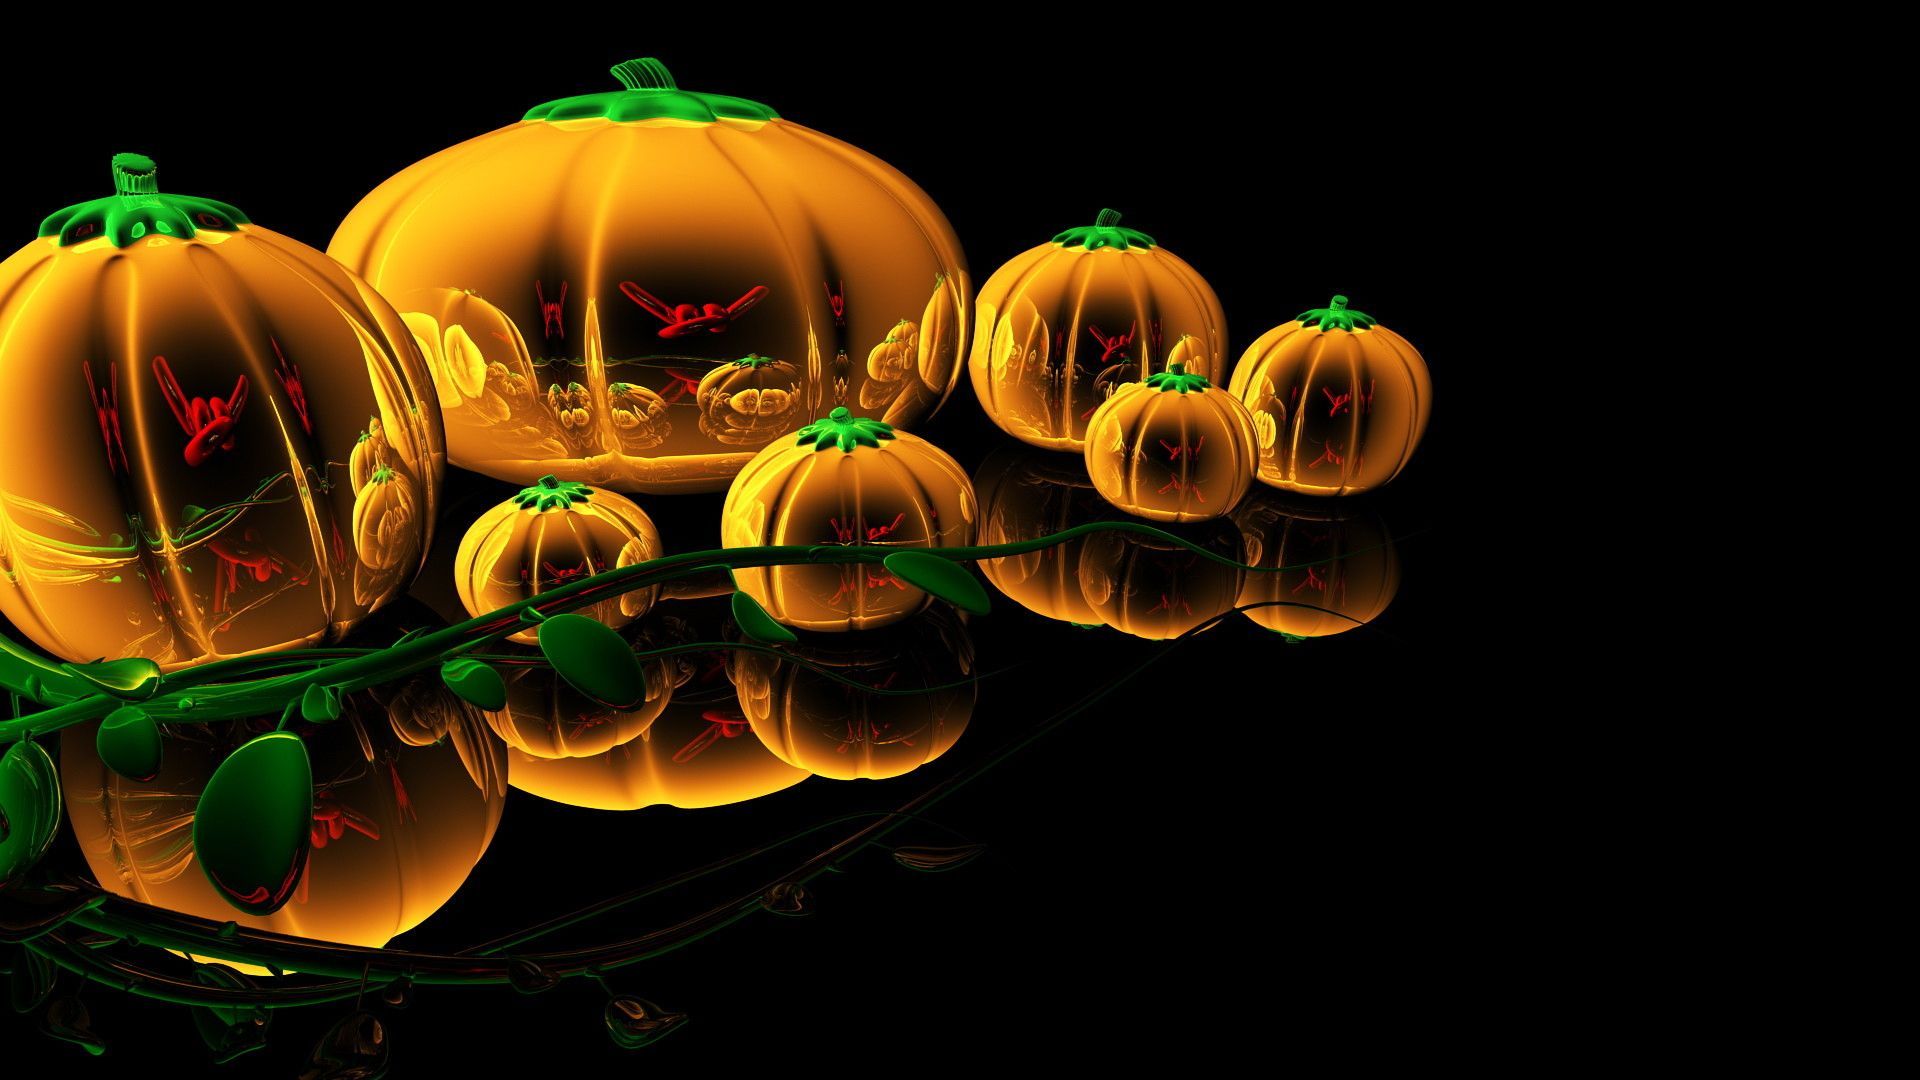 Wallpapers Download 1920x1080 Abstract glass pumpkins